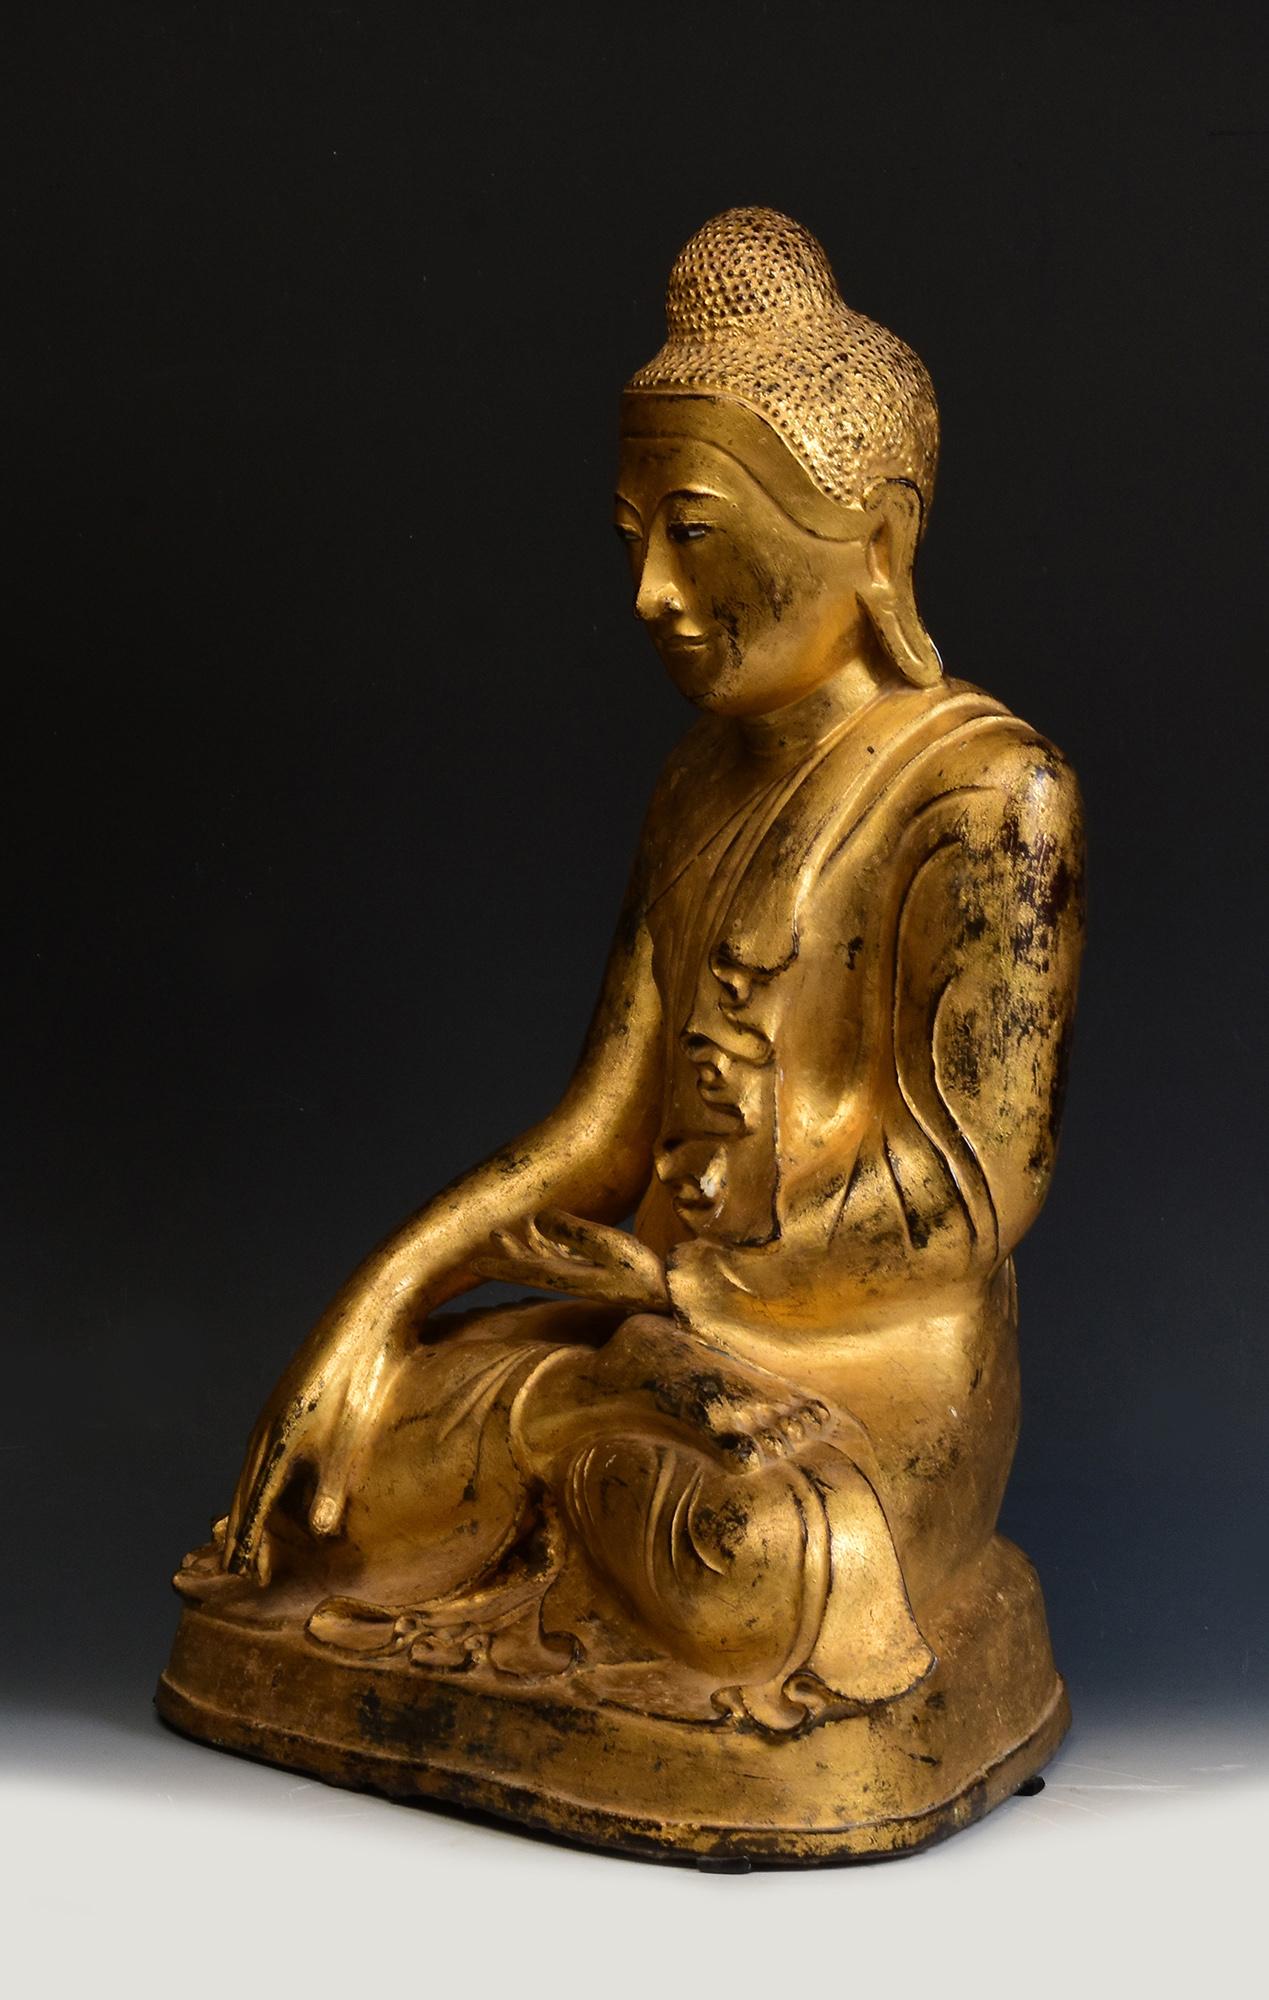 19th Century, Mandalay, Antique Burmese Bronze Seated Buddha with Gilded Gold For Sale 3